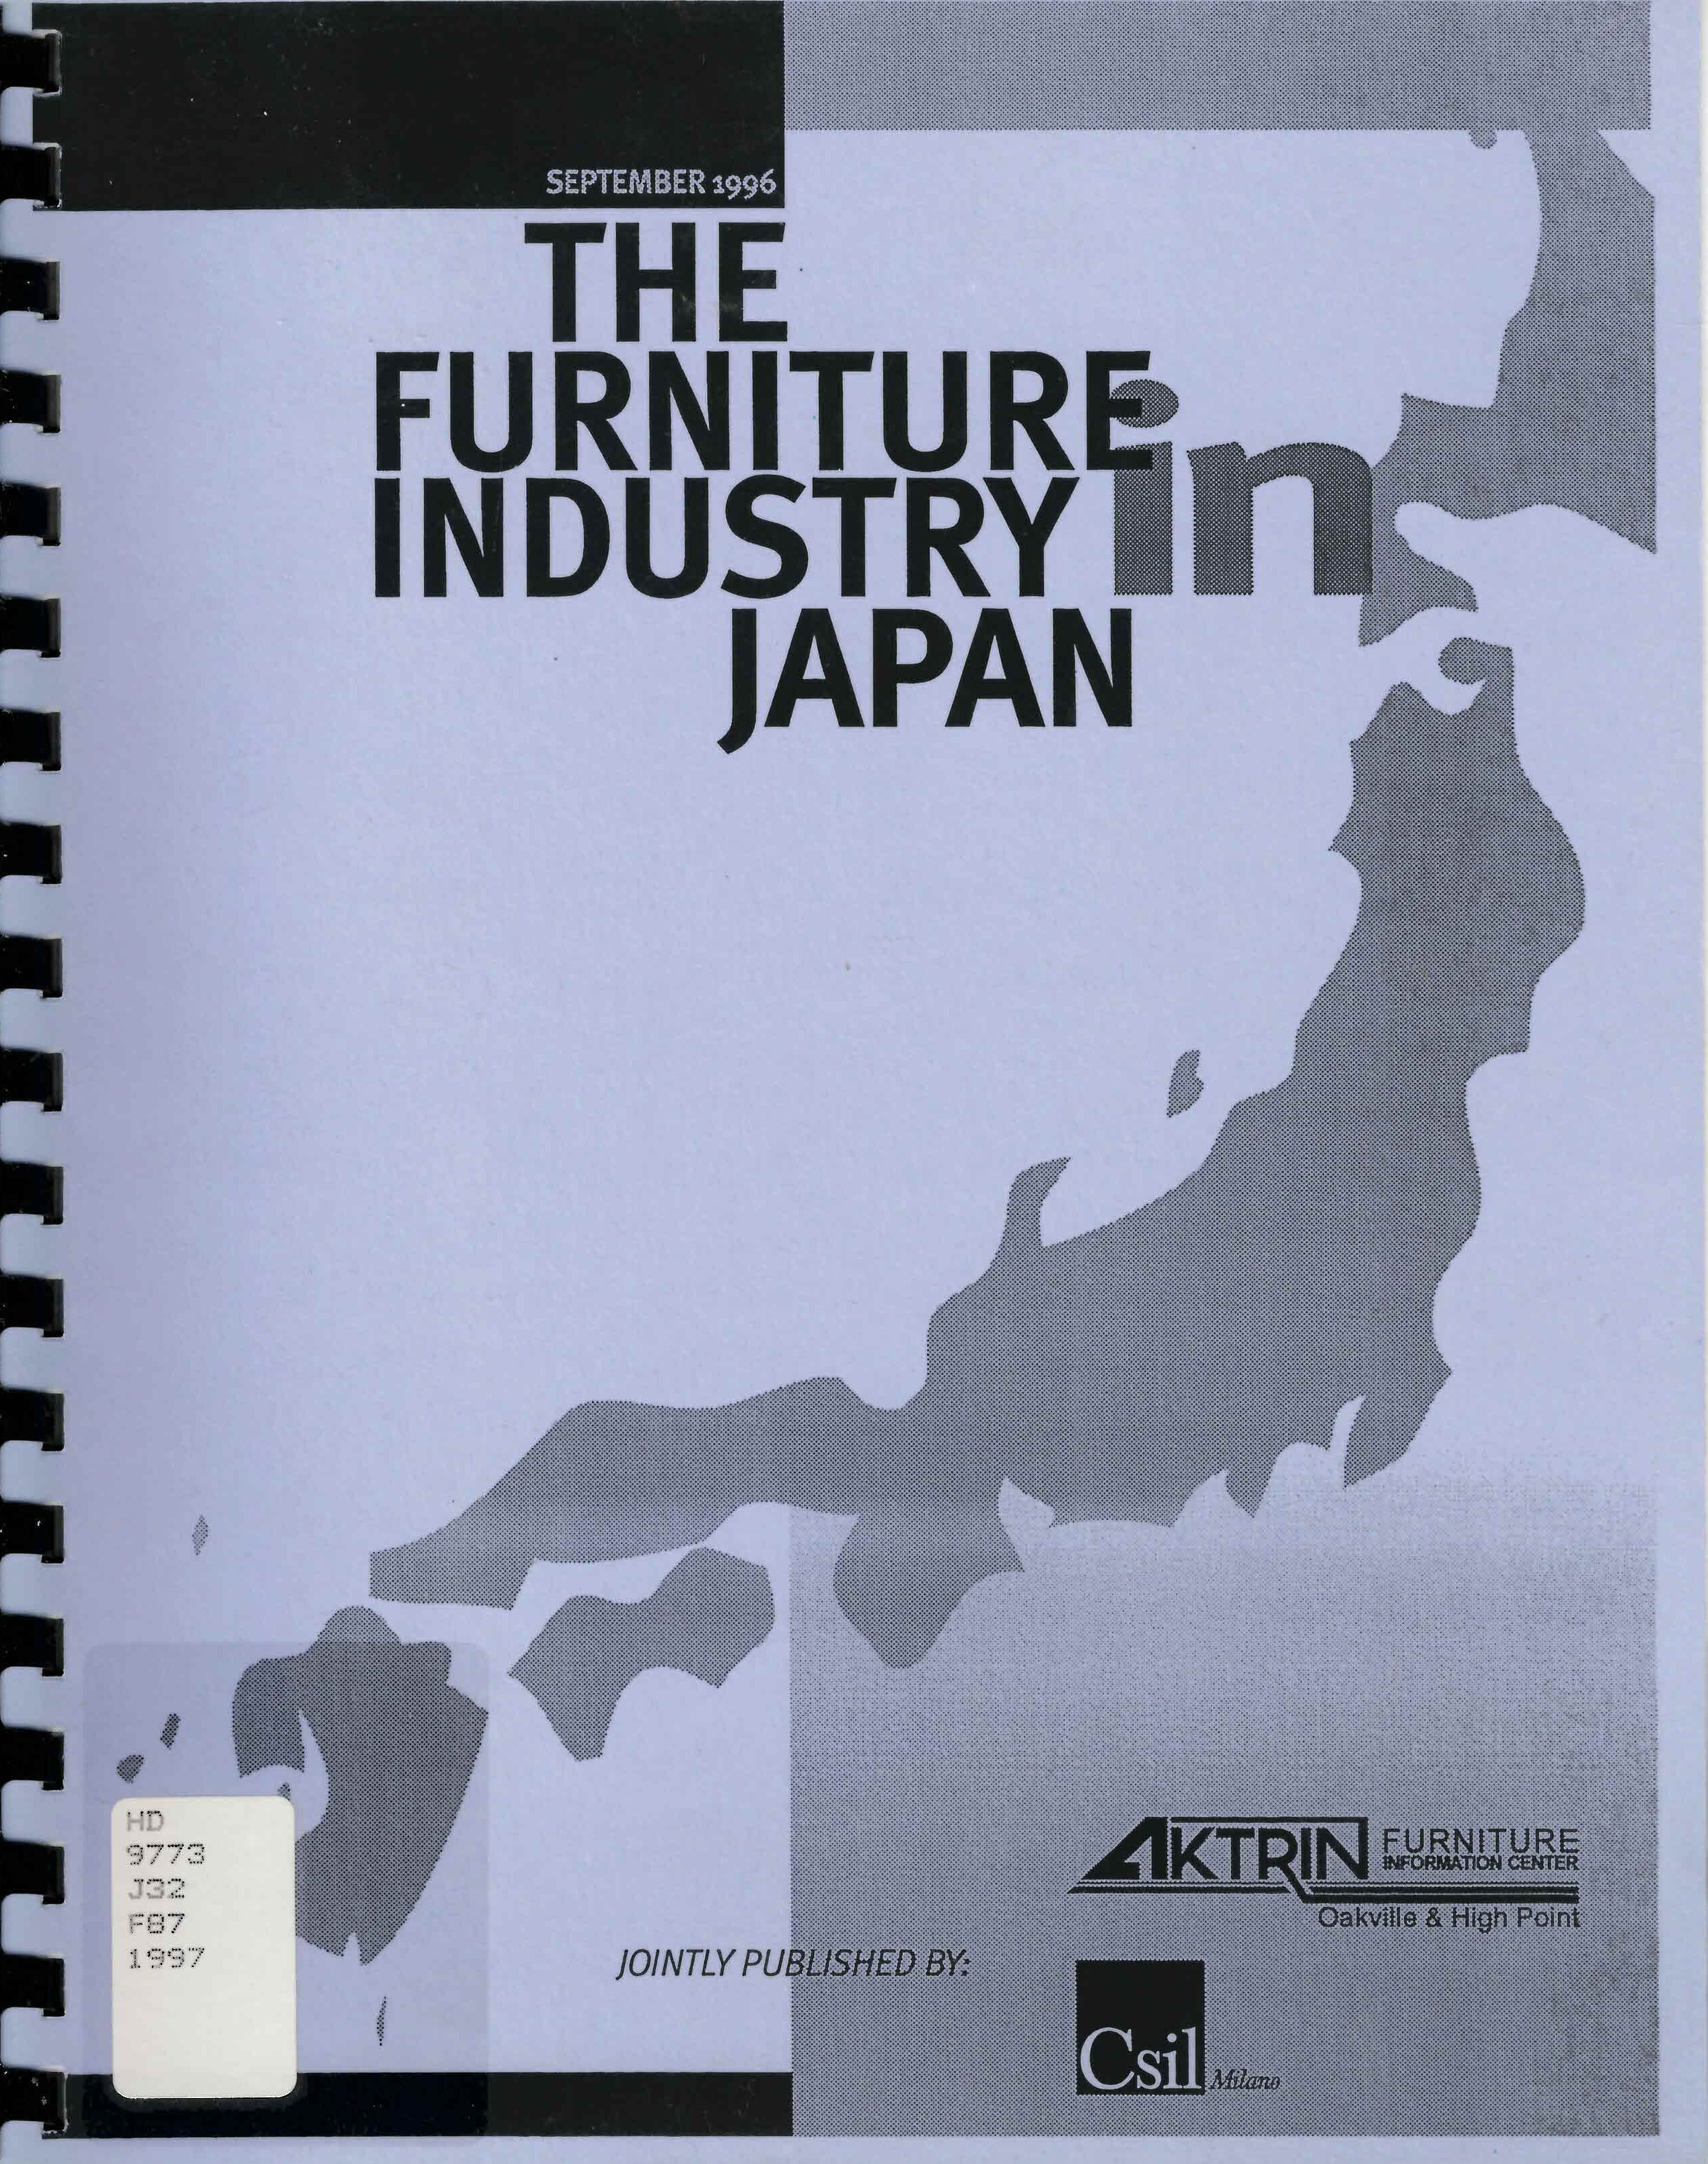 The furniture industry in Japan